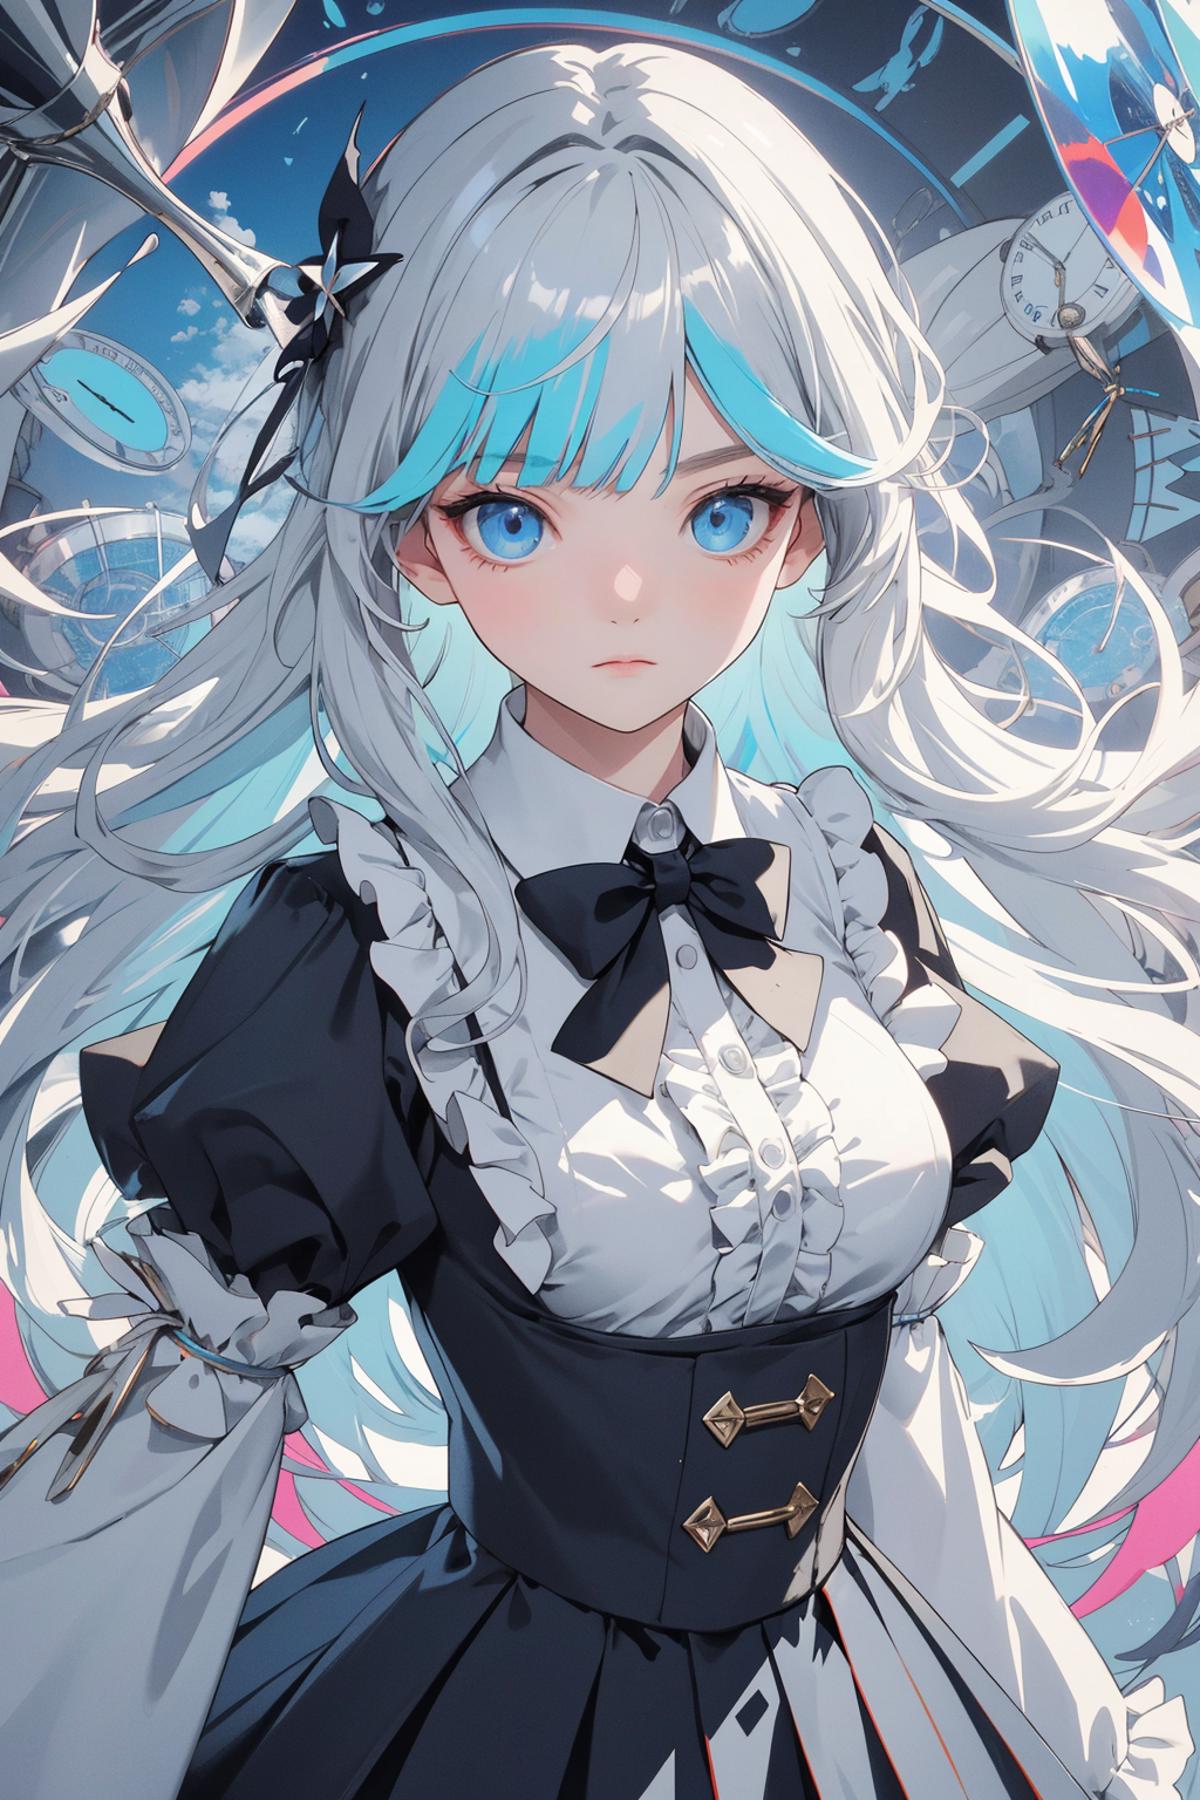 Anime character in maid outfit with blue eyes and pink hair.